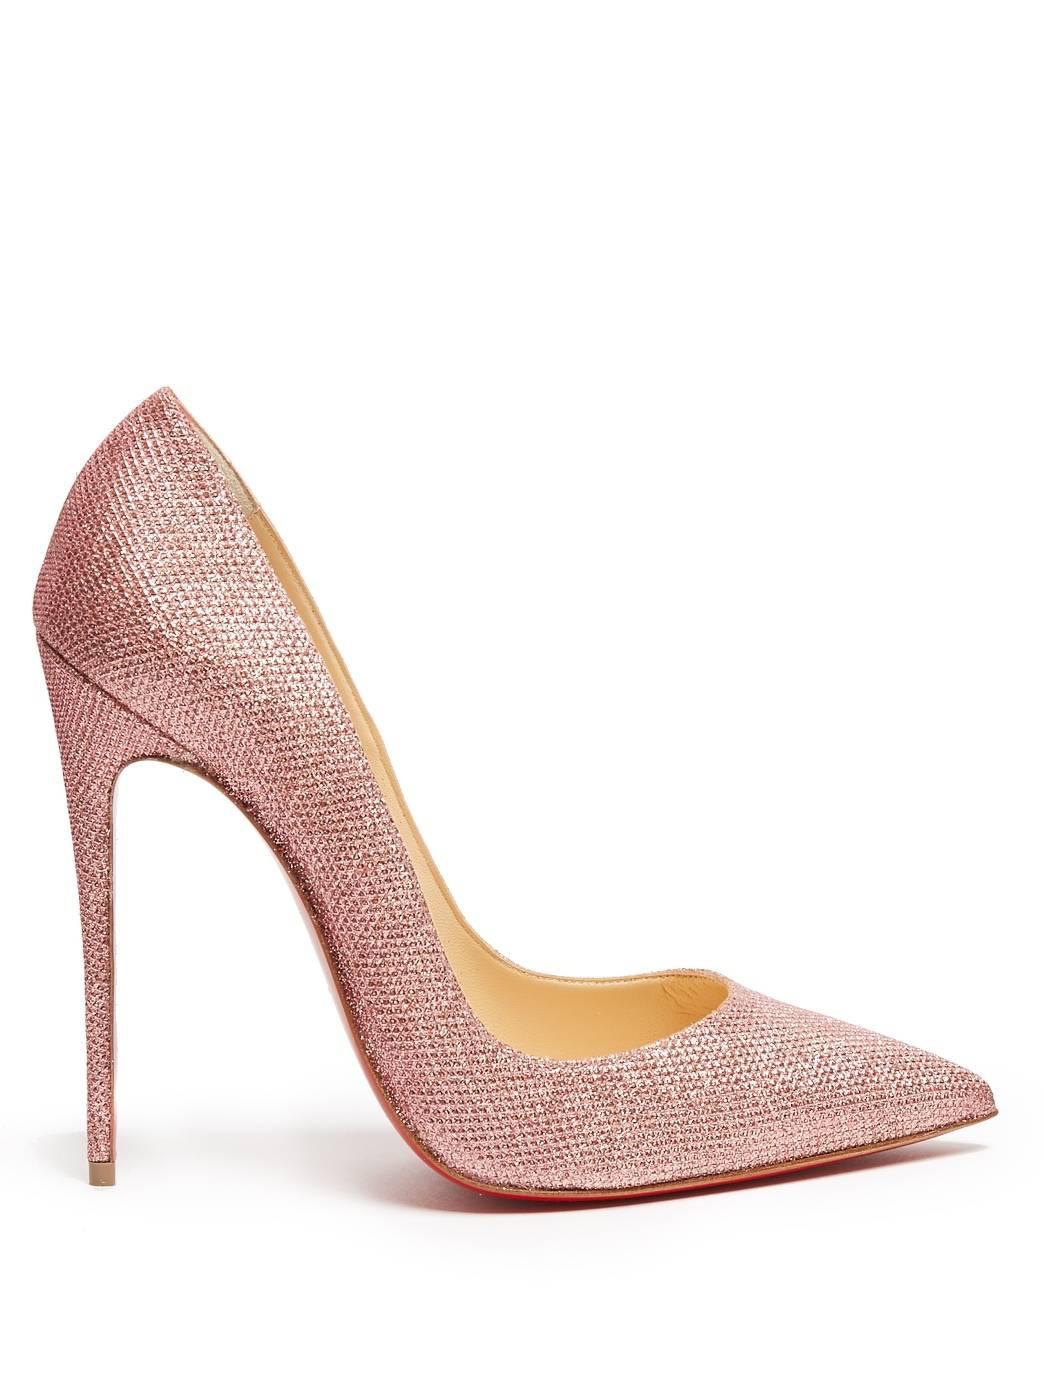 Christian Louboutin New Pink Canvas So Kate Evening High Heels Pumps in Box In New Condition In Chicago, IL